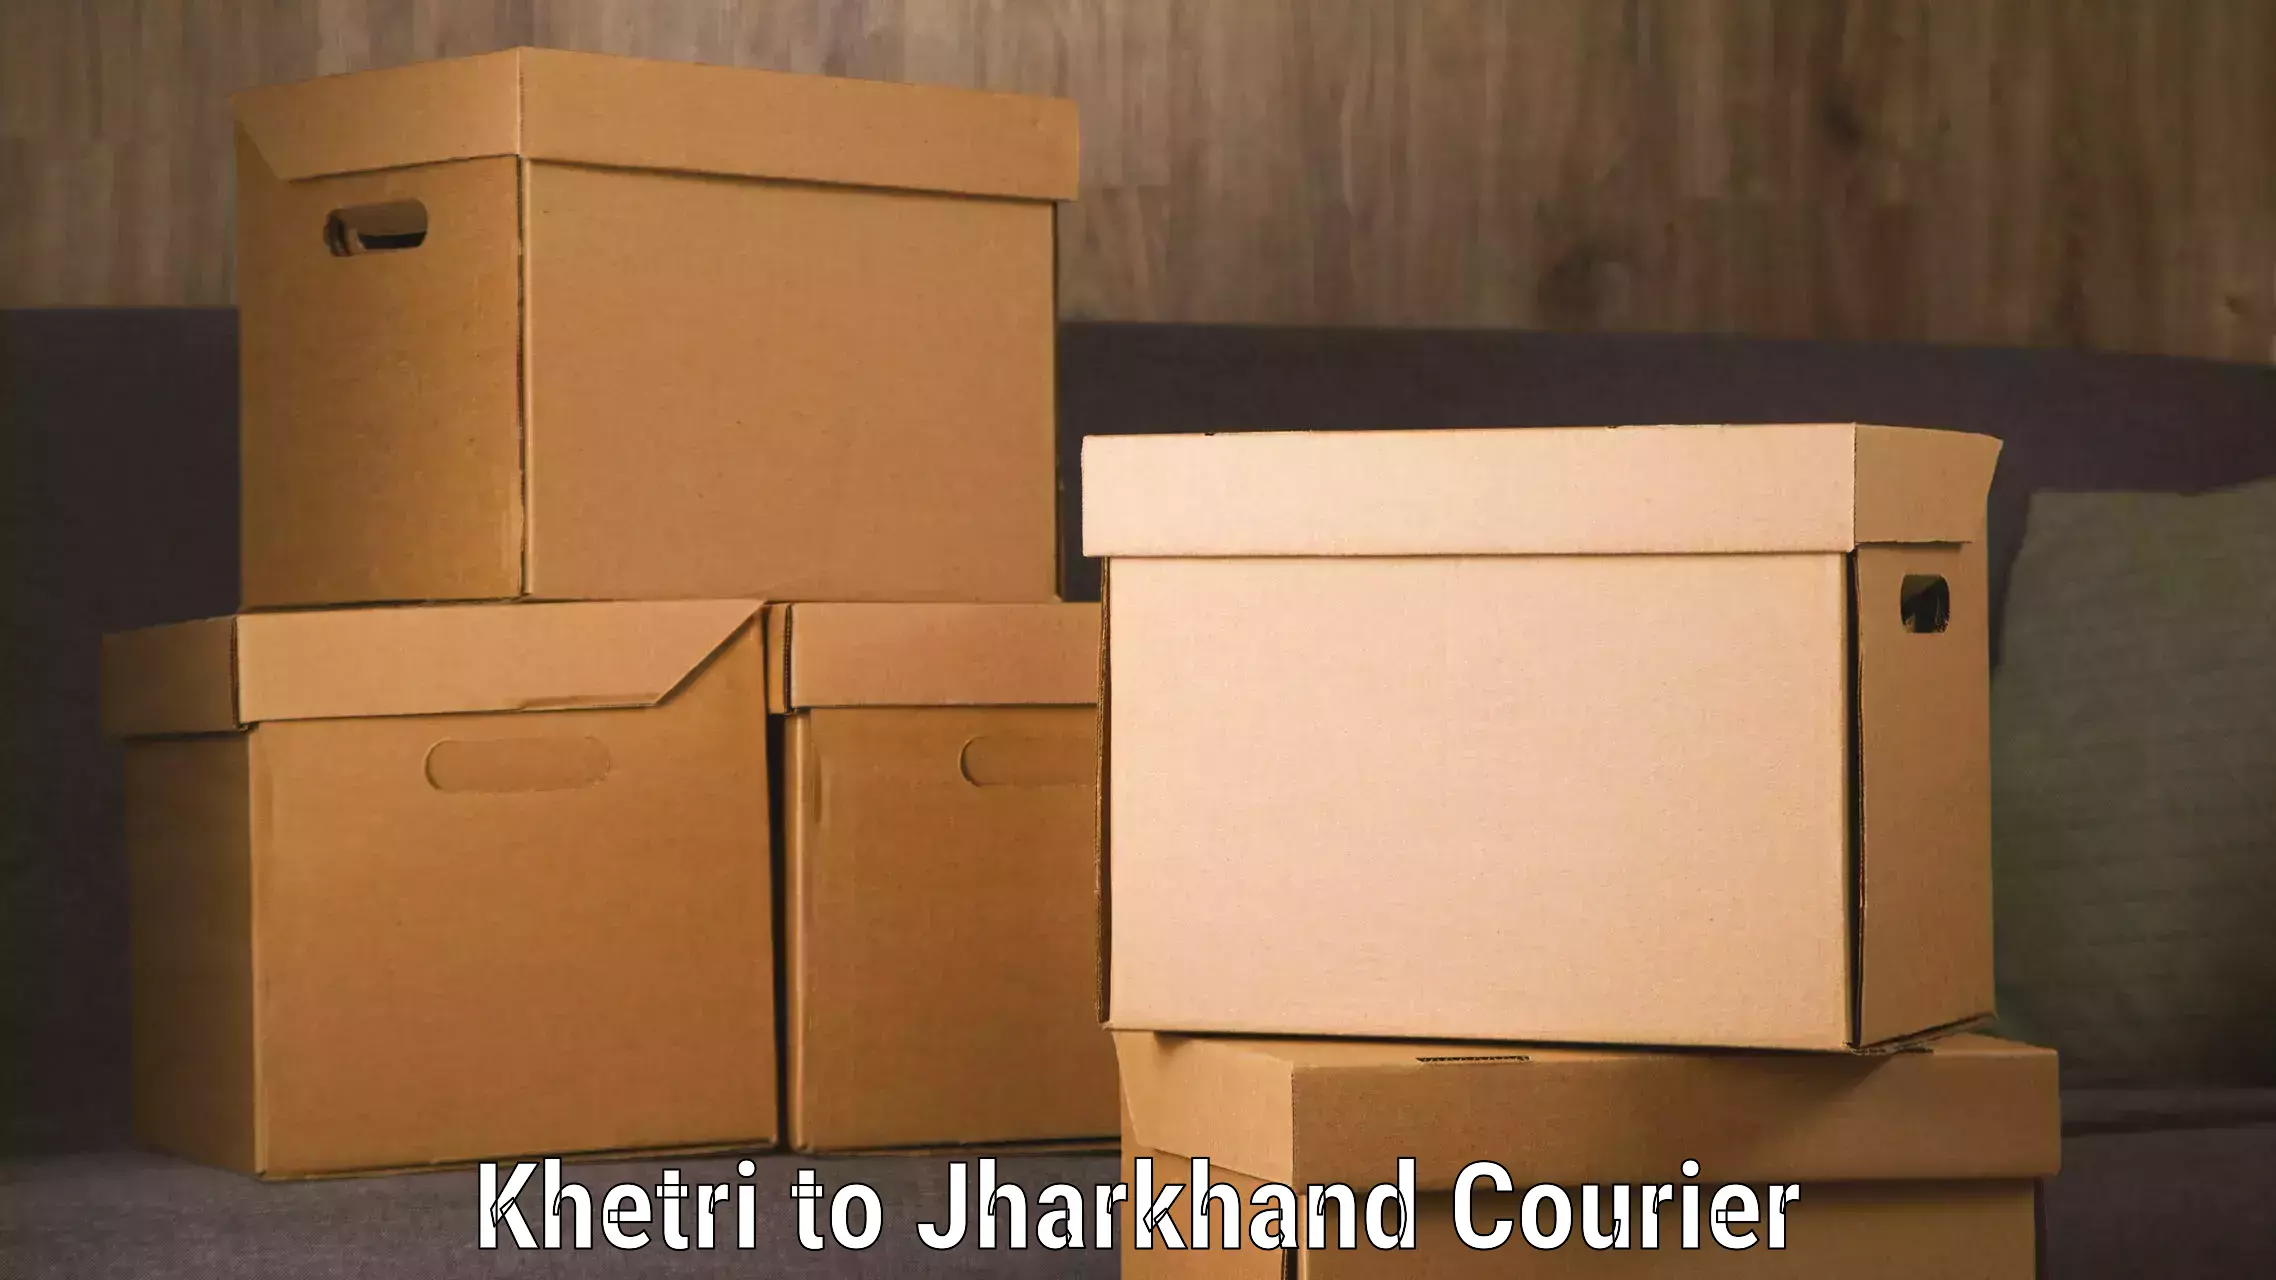 Multi-destination luggage transport in Khetri to Jharkhand